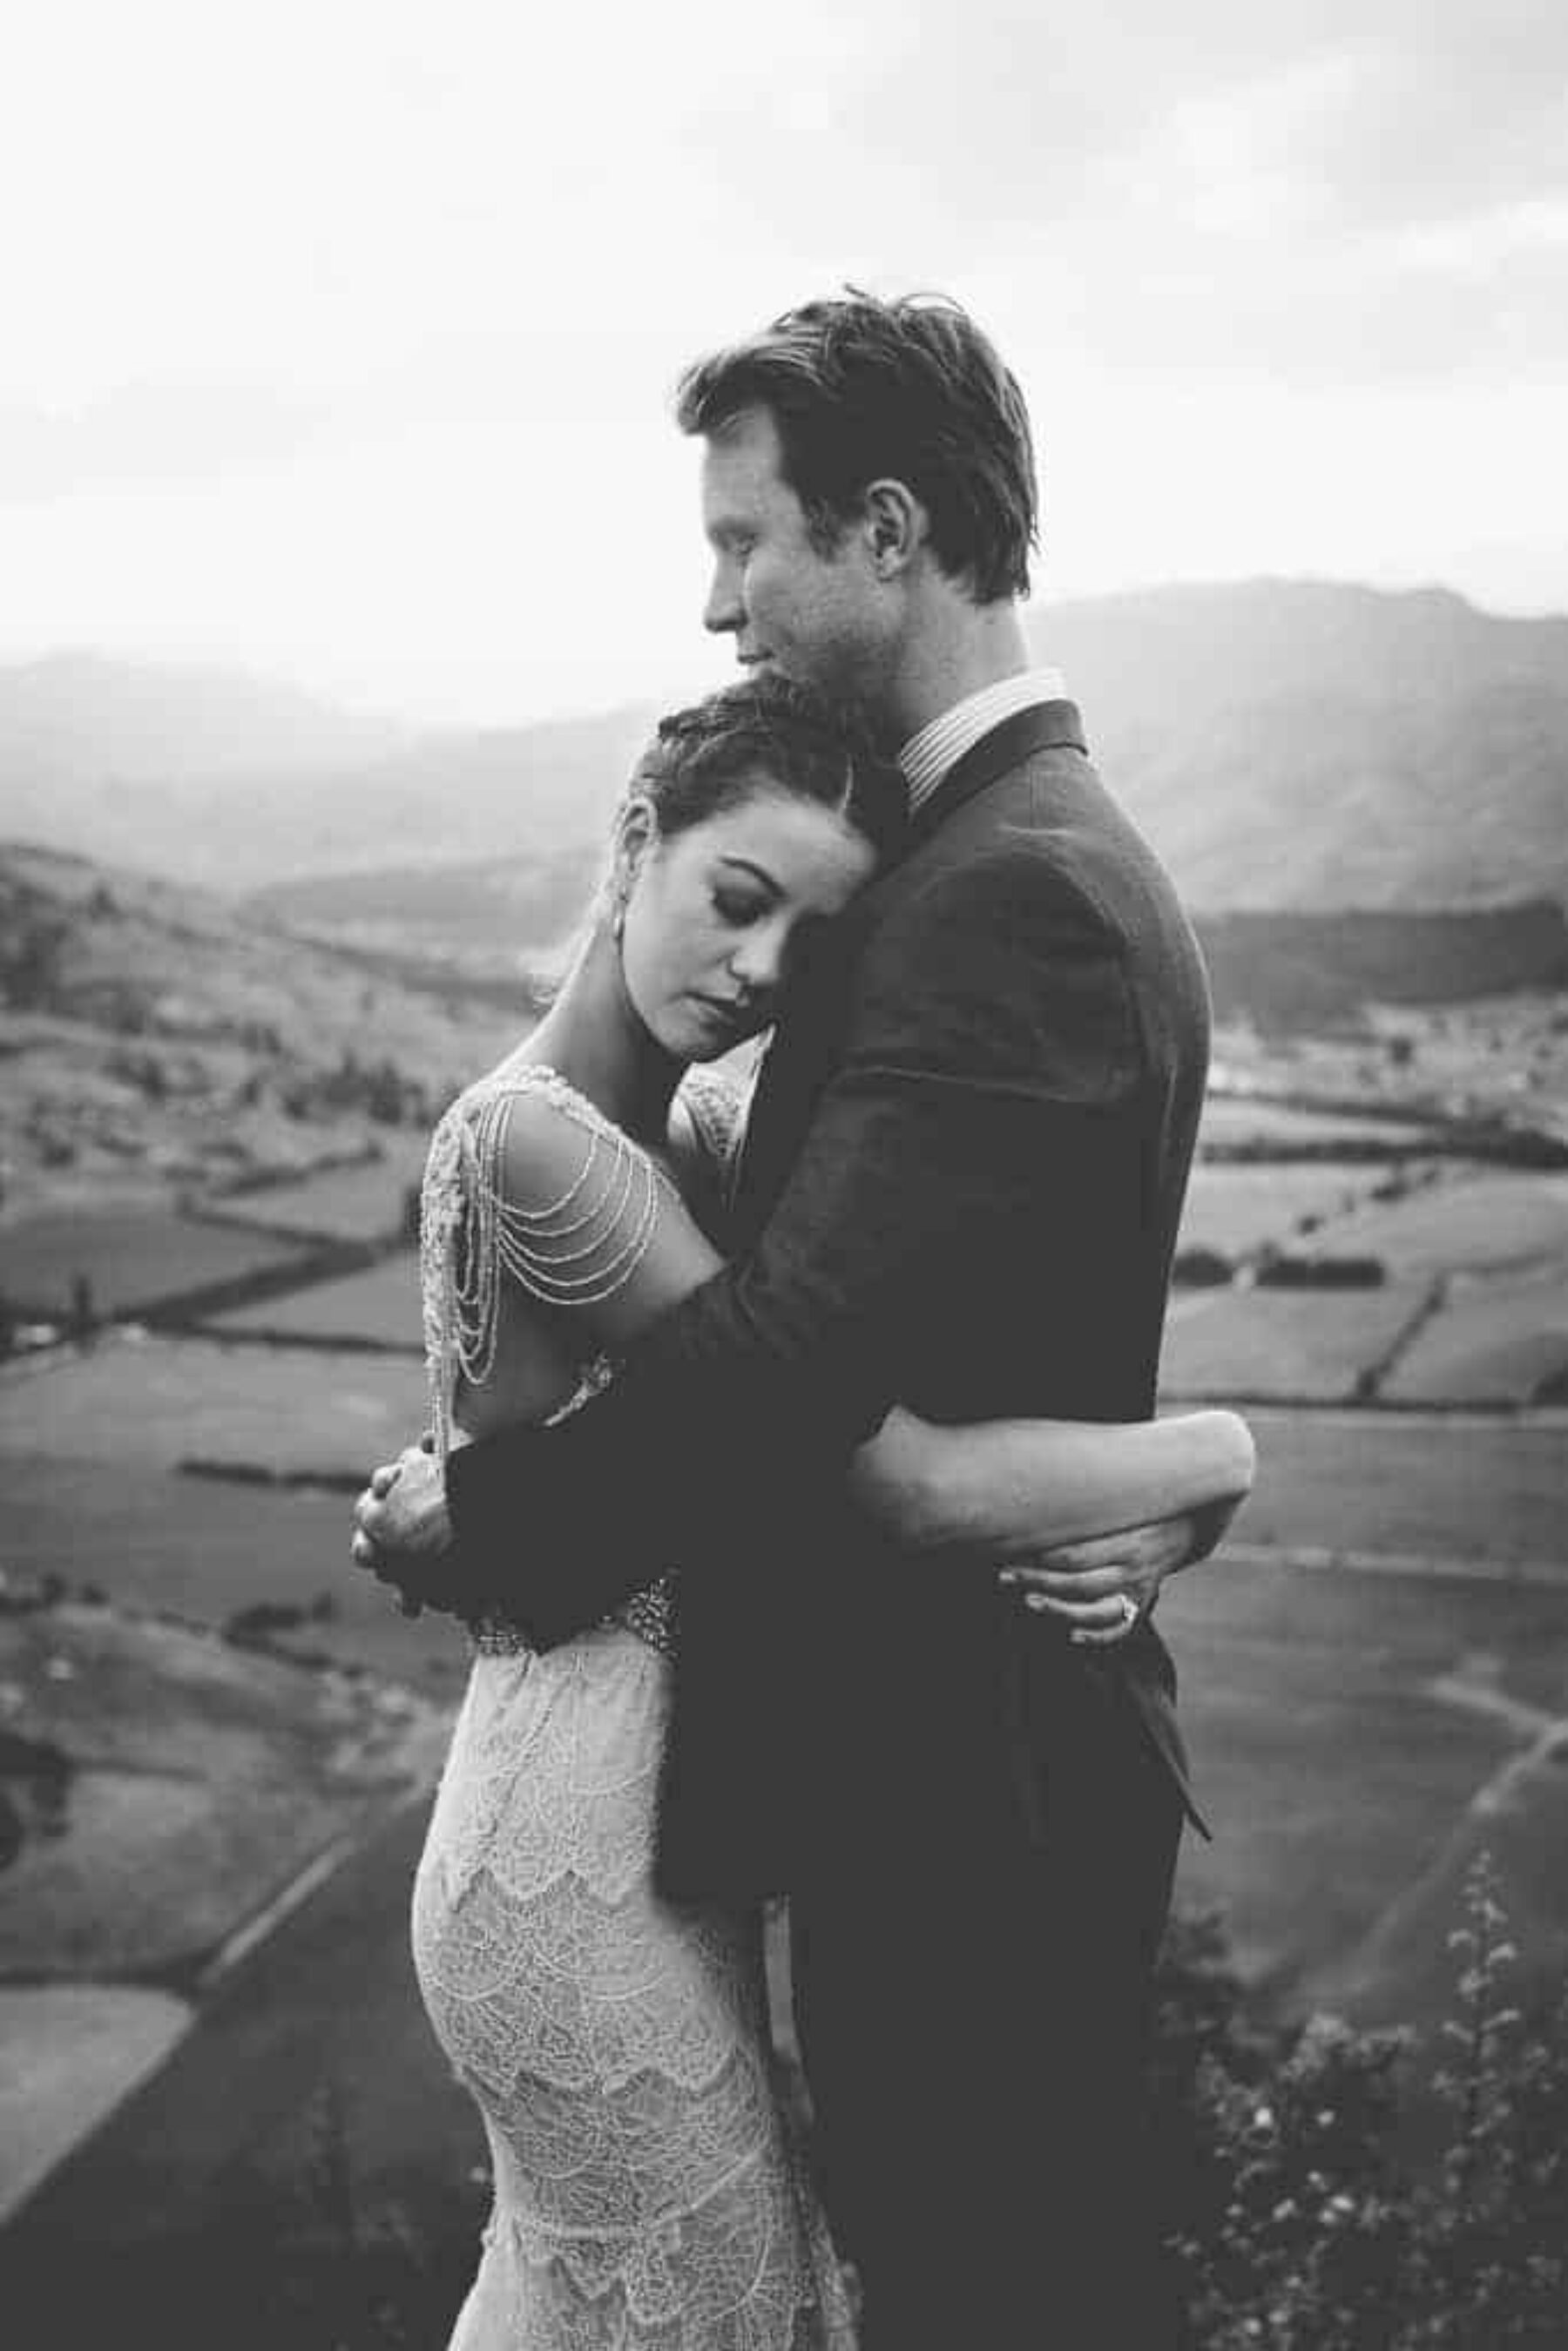 WIn a Wanaka New Zealand helicopter wedding valued at over $24,000!